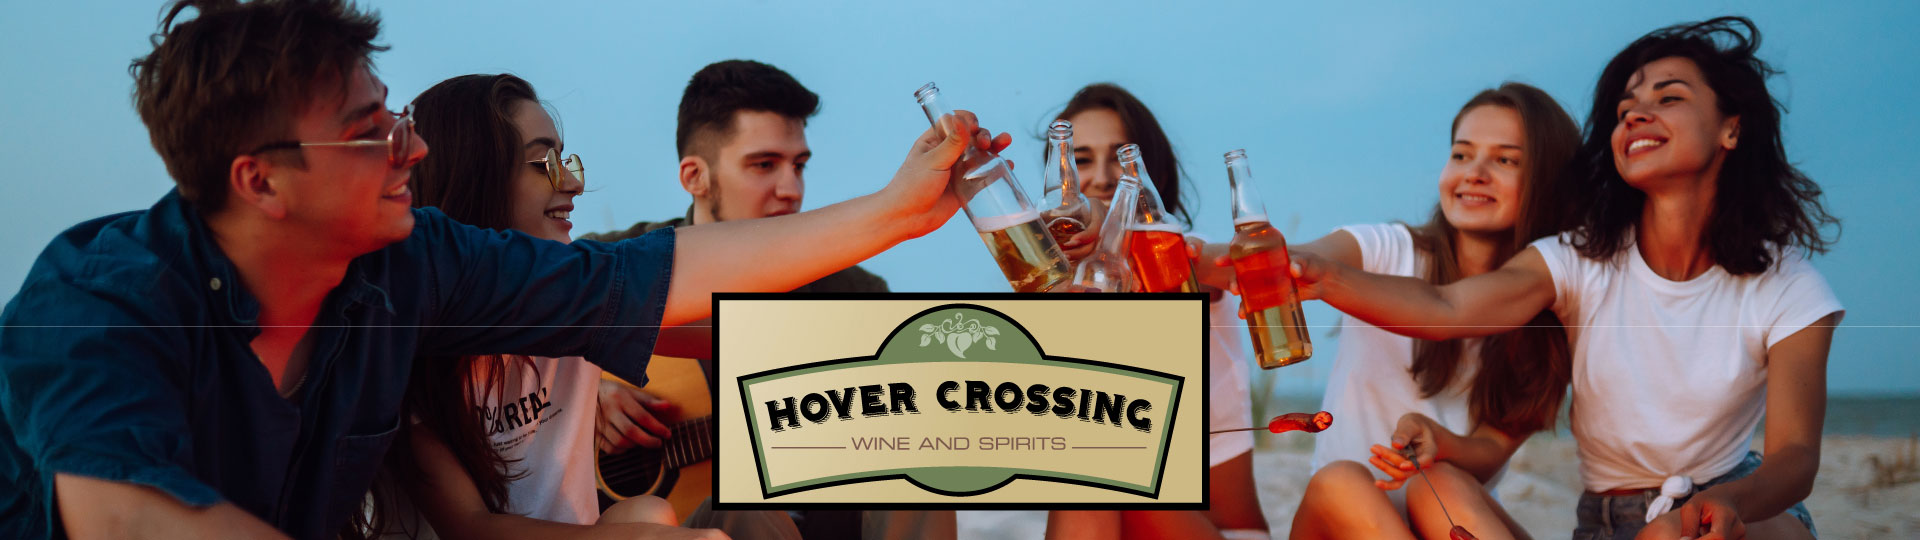 Hover Crossing Wine & Spirits